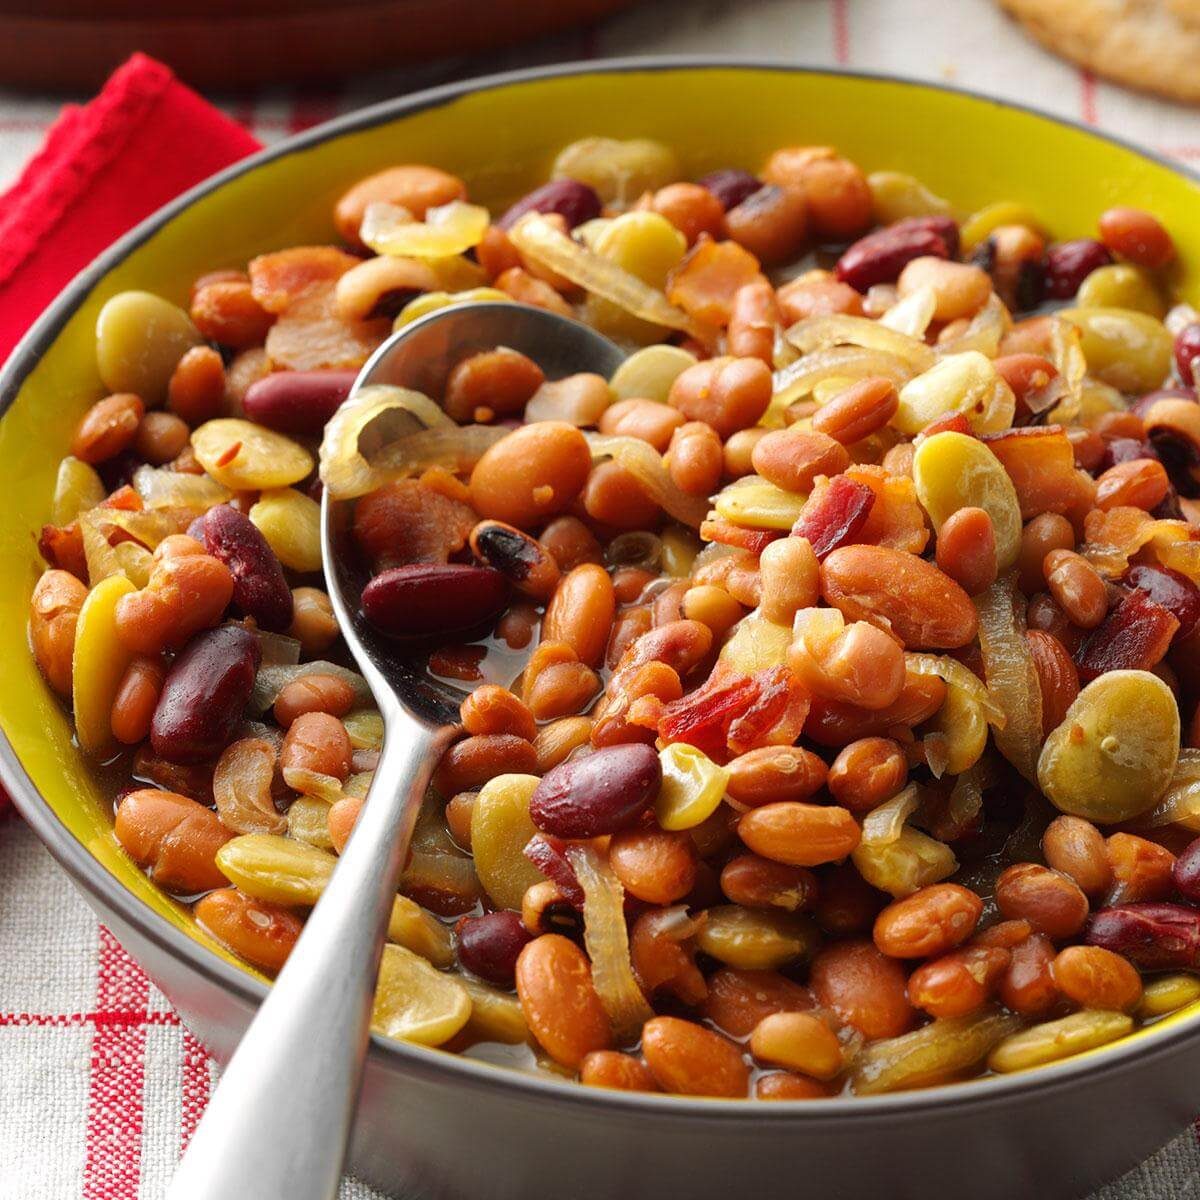 How to Use Every Type of Canned Beans